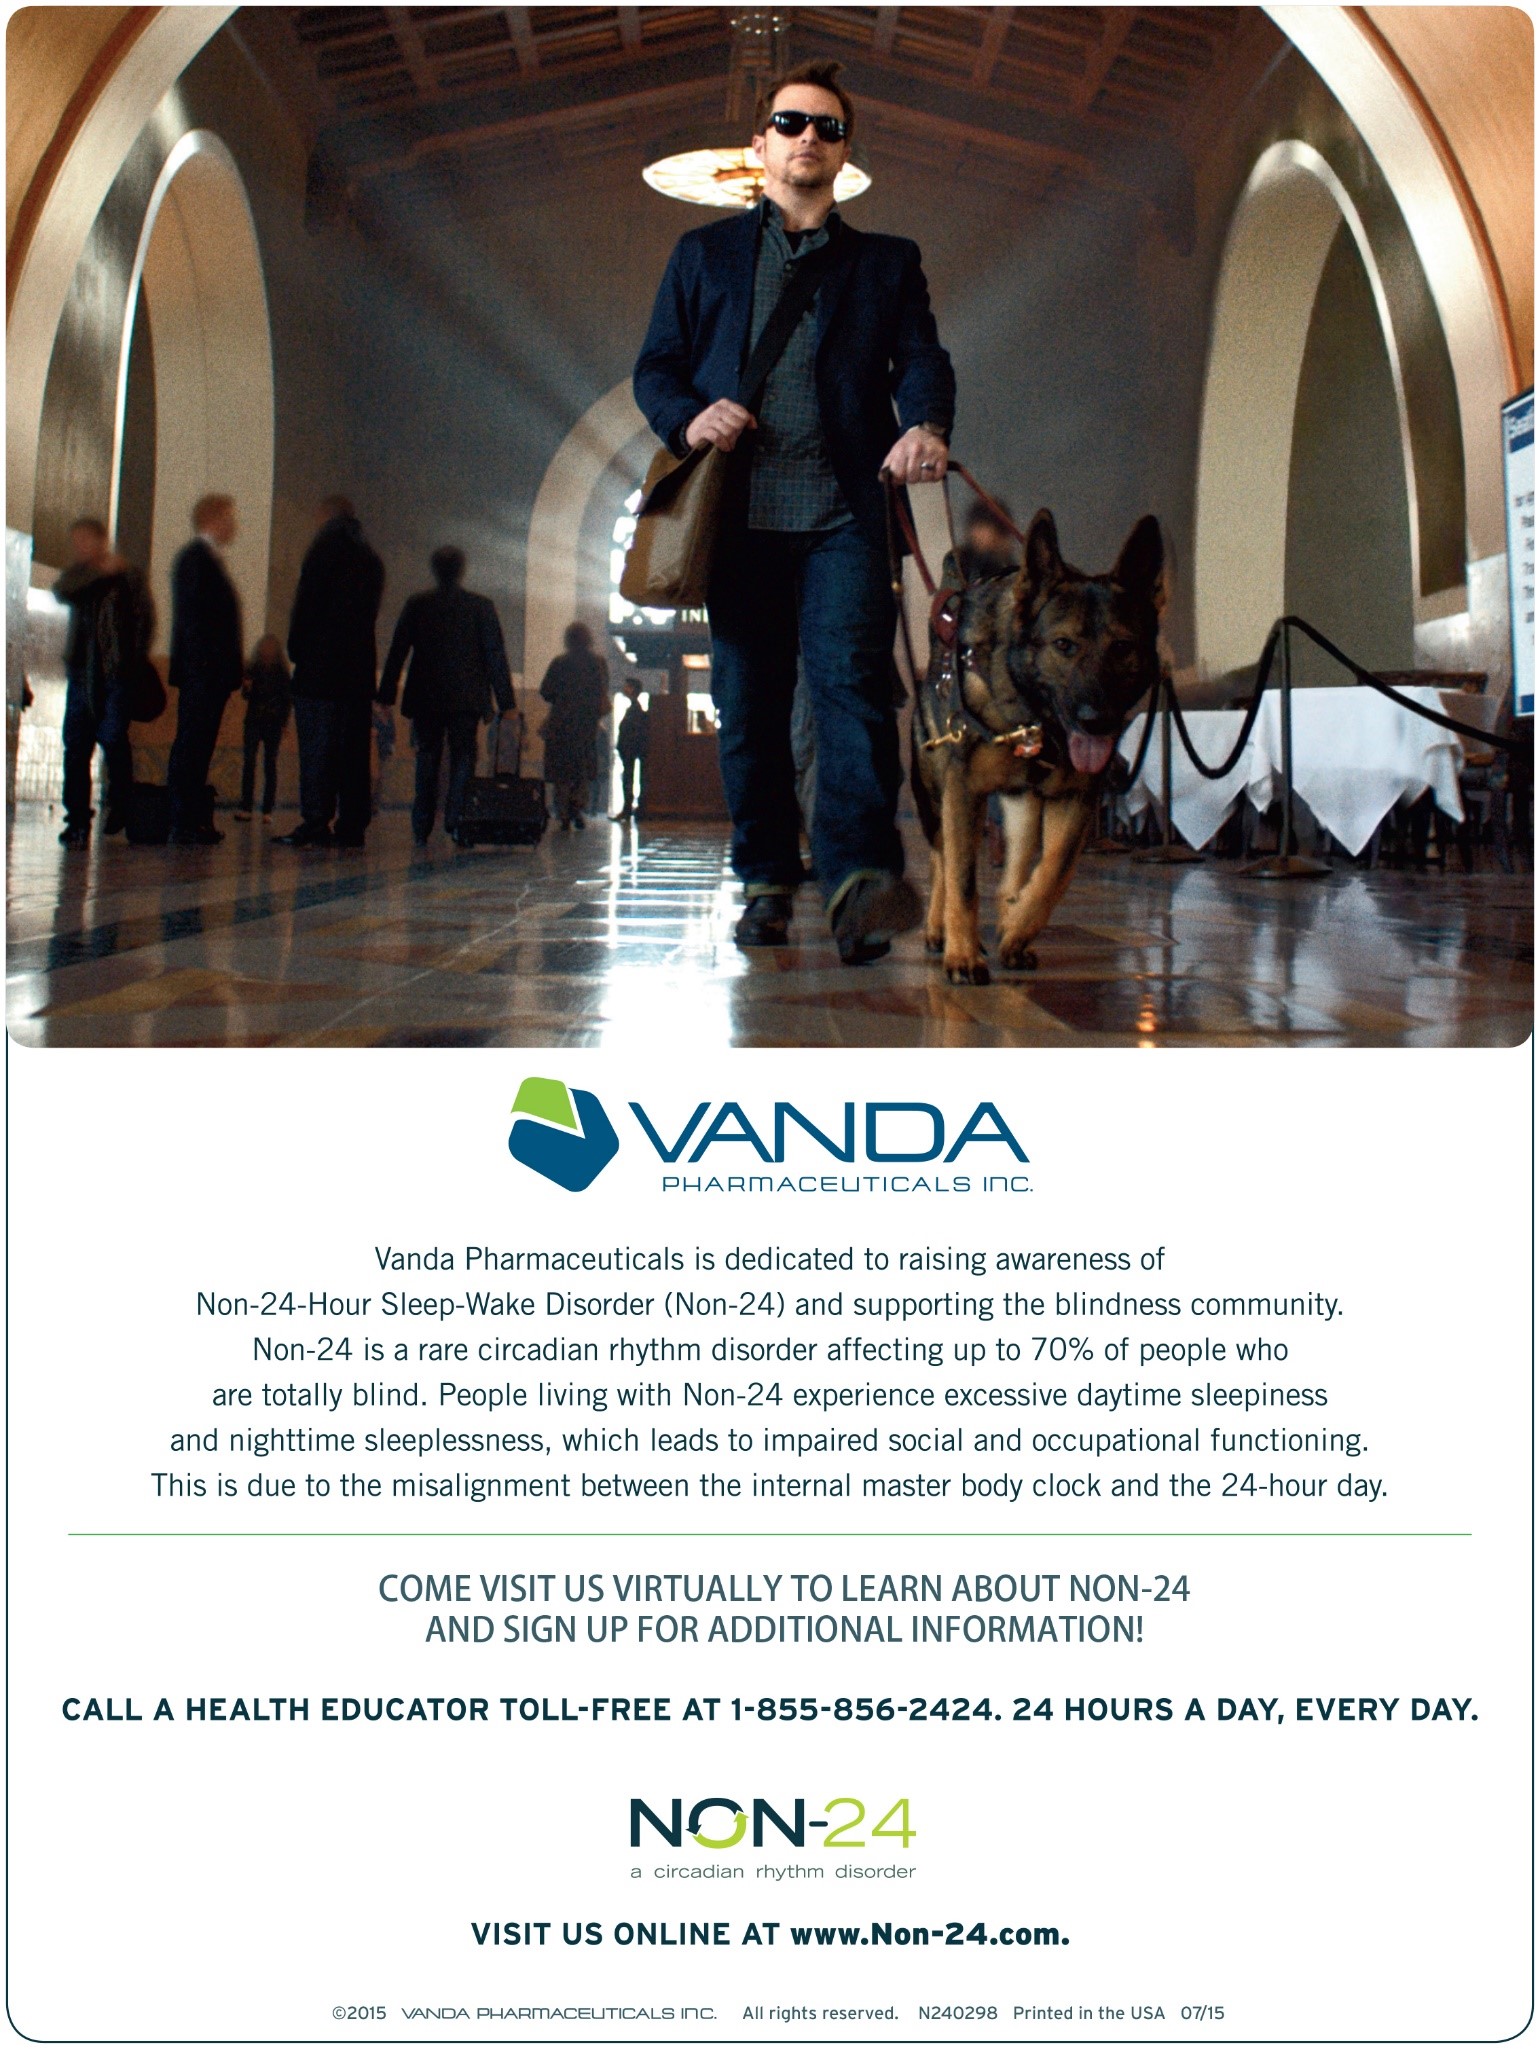 Vanda Pharmaceuticals is dedicated to raising awareness of Non-24-Hour Sleep-Wake Disorder (Non-24) and supporting the blindness community. Non-24 is a rare circadian rhythm disorder affecting up to 70% of people who are totally blind. People living with Non-24 experience excessive daytime sleepiness and nighttime sleeplessness, which leads to impaired social and occupational functioning. This is due to the misalignment between the internal master body clock and the 24-hour day. Come visit us virtually to learn about non-24 and sign up for additional information. Call a health educator toll-free at 1-855-856-2424. 24 hours a day, every day. Visit us online at www.non-24.com.